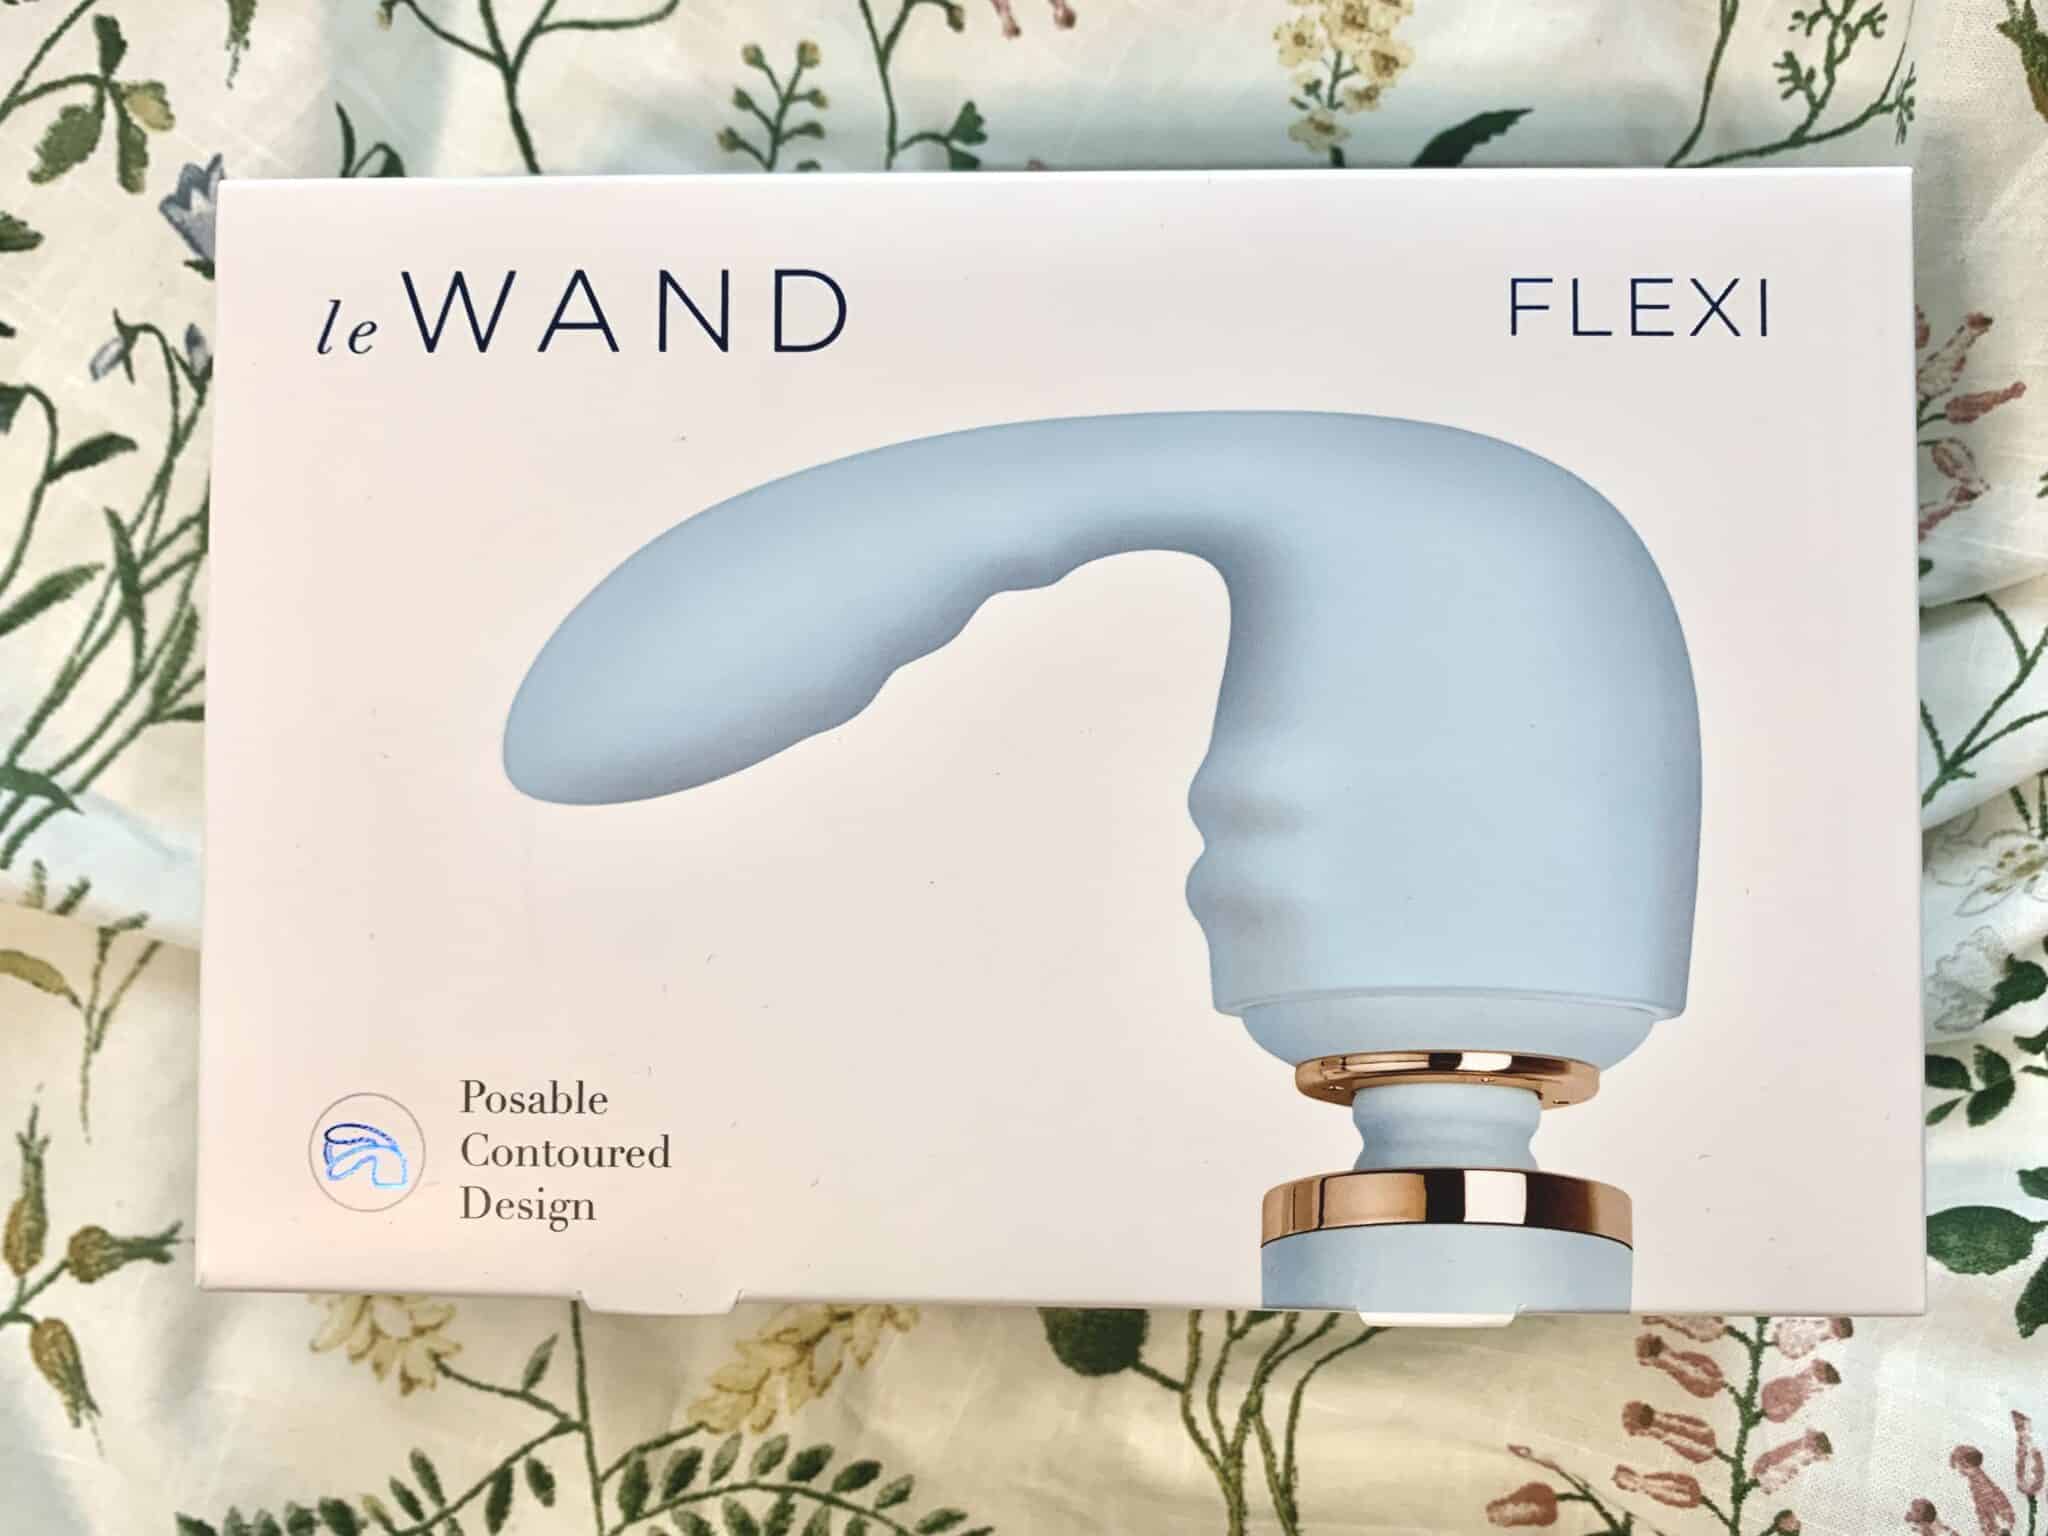 Le Wand Flexi Unwrapping the Le Wand Flexi: A Look at the Packaging